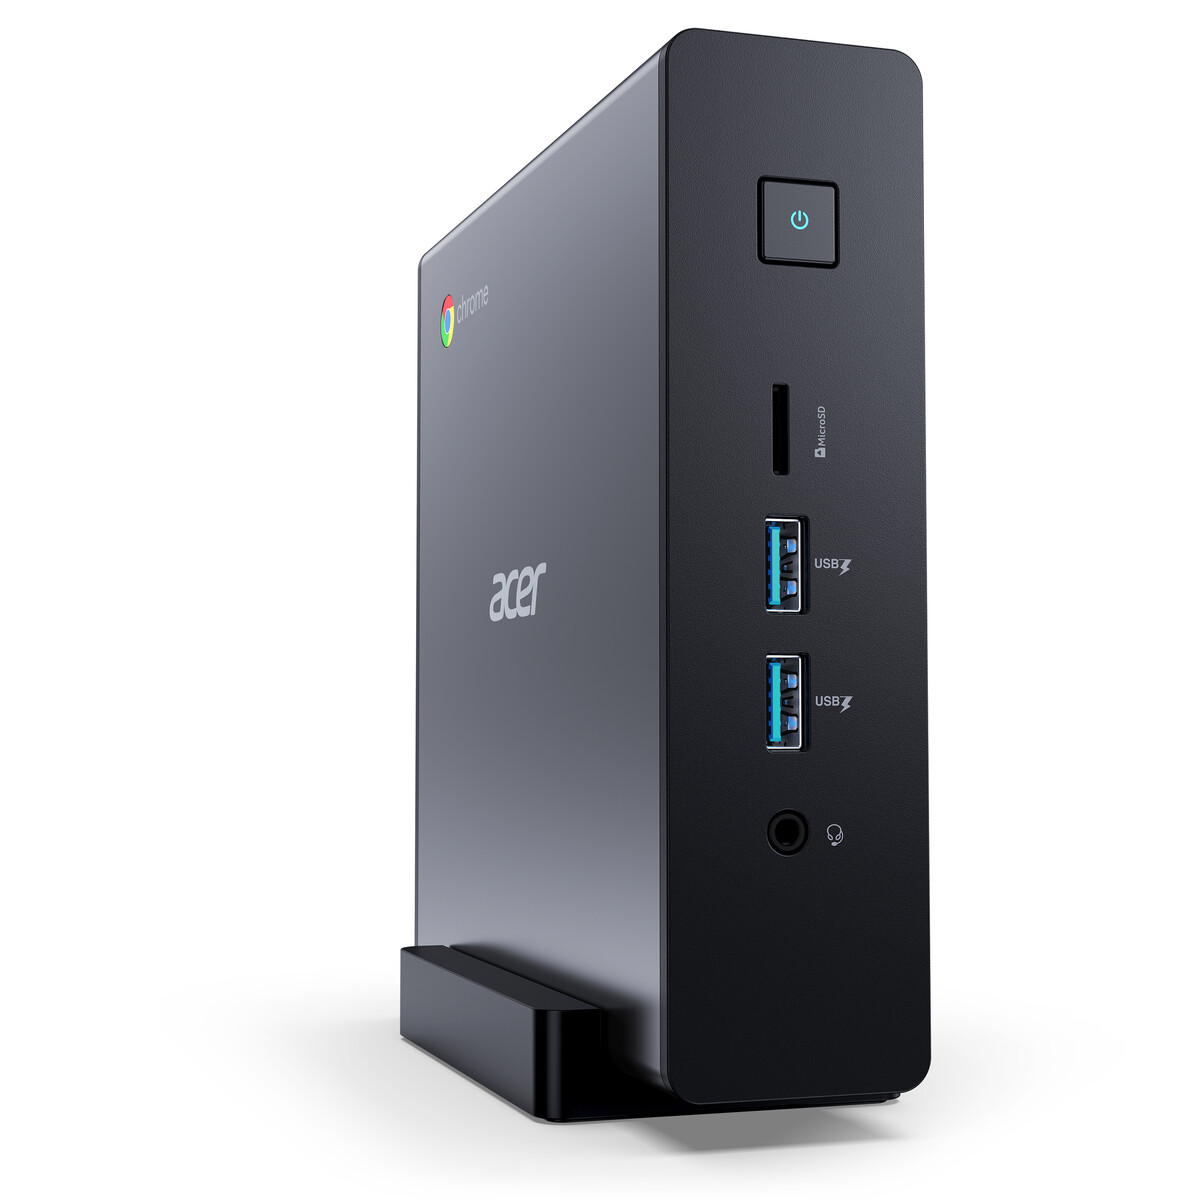 Acer pitches its new Chromebox CXI4 as a desktop-replacement for